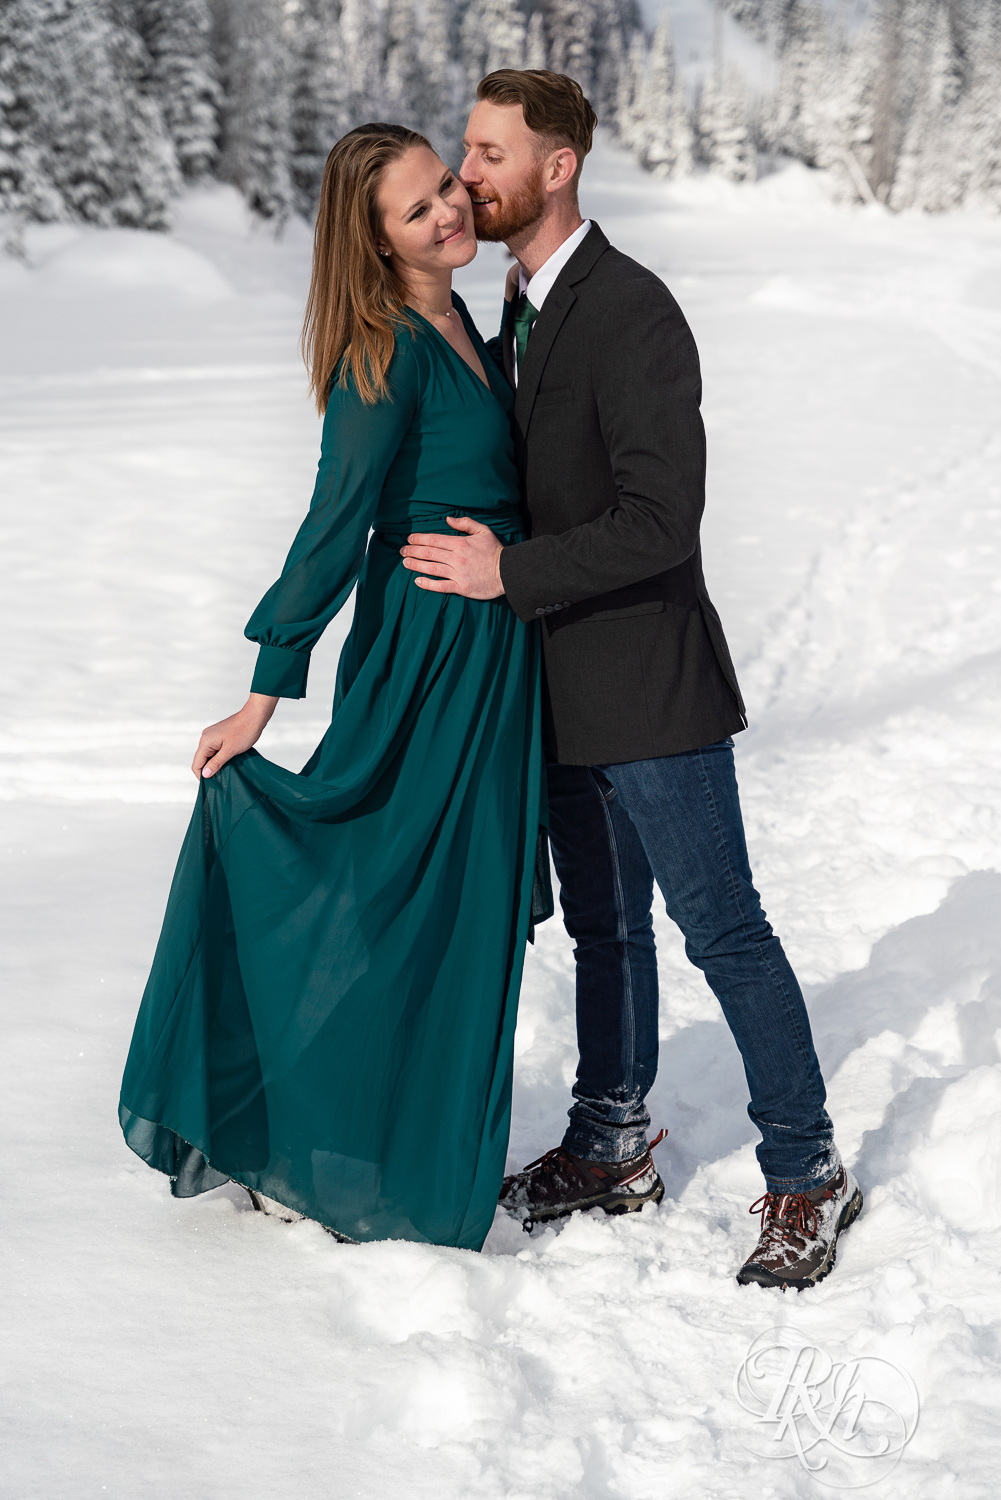 Man in suit and woman in green dress kiss in snow on Dream Lake in Rocky Mountain National Park, Colorado.